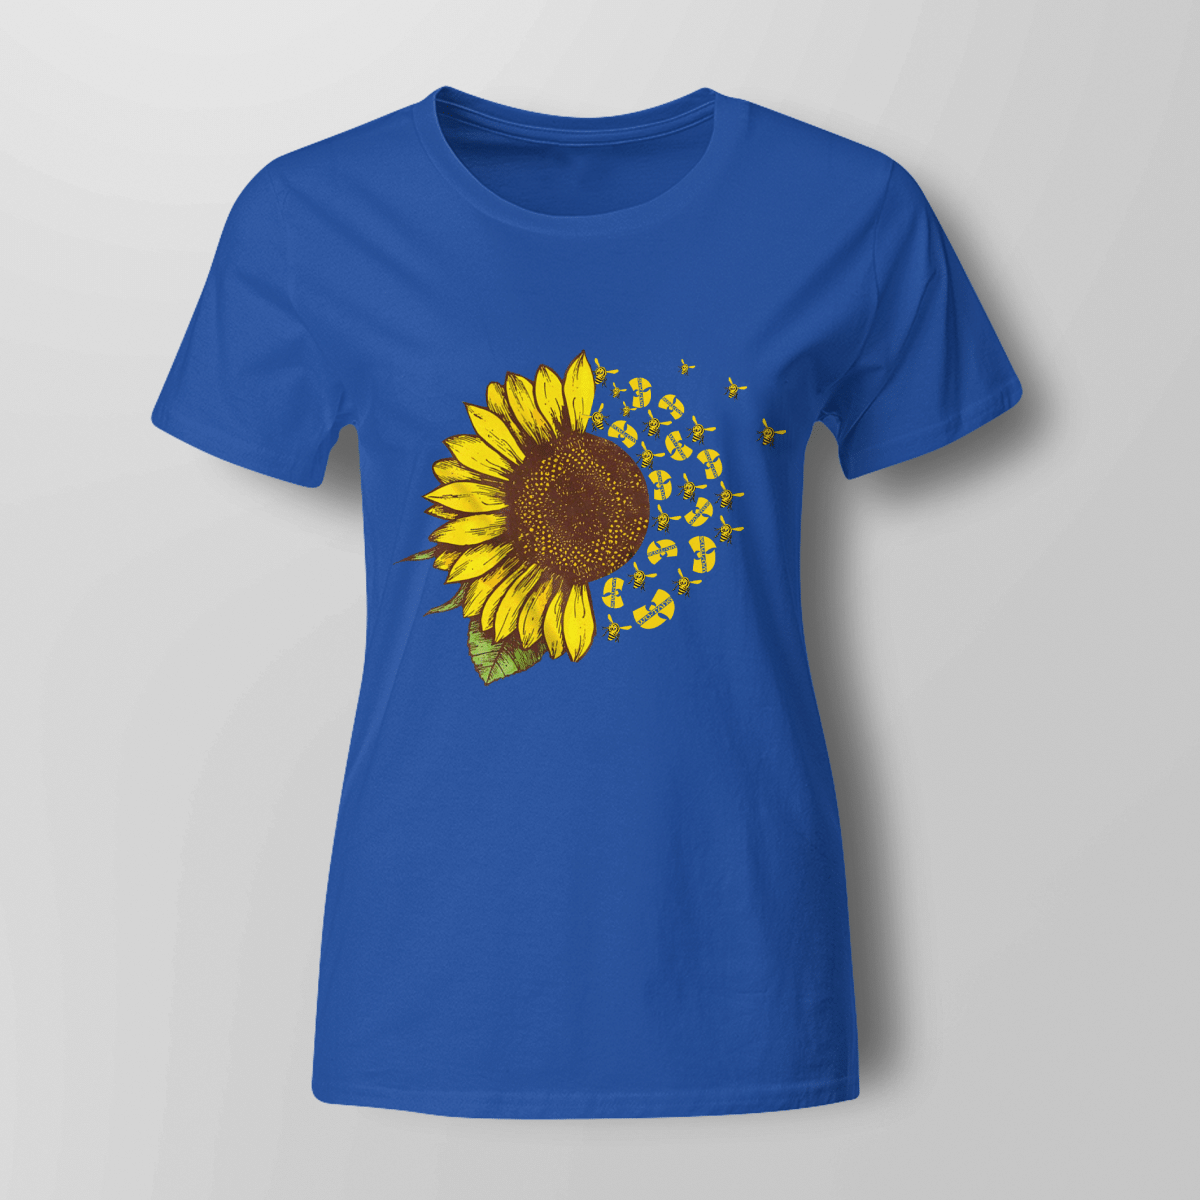 Wu-tang Clan Bee And Sunflower T-shirt